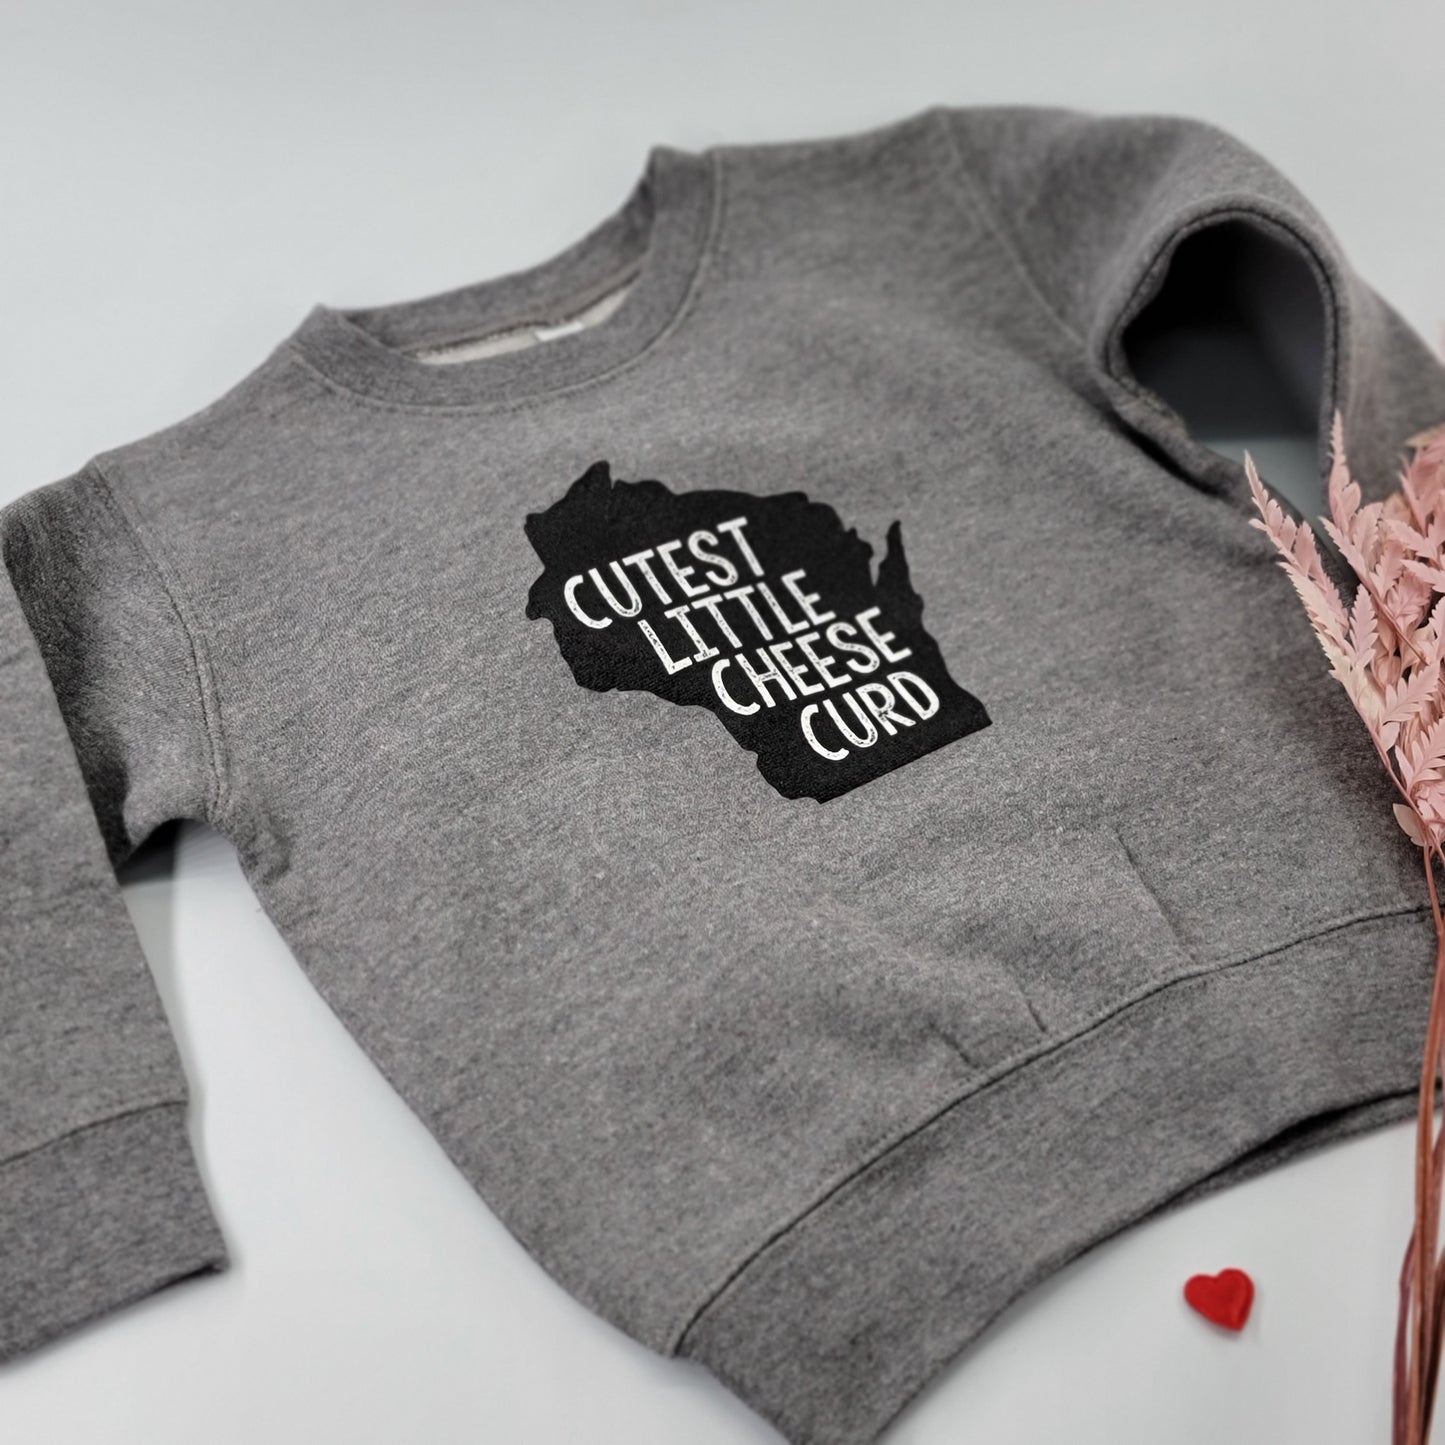 Cutest Little Cheese Curd Toddler Sweatshirt Grey color